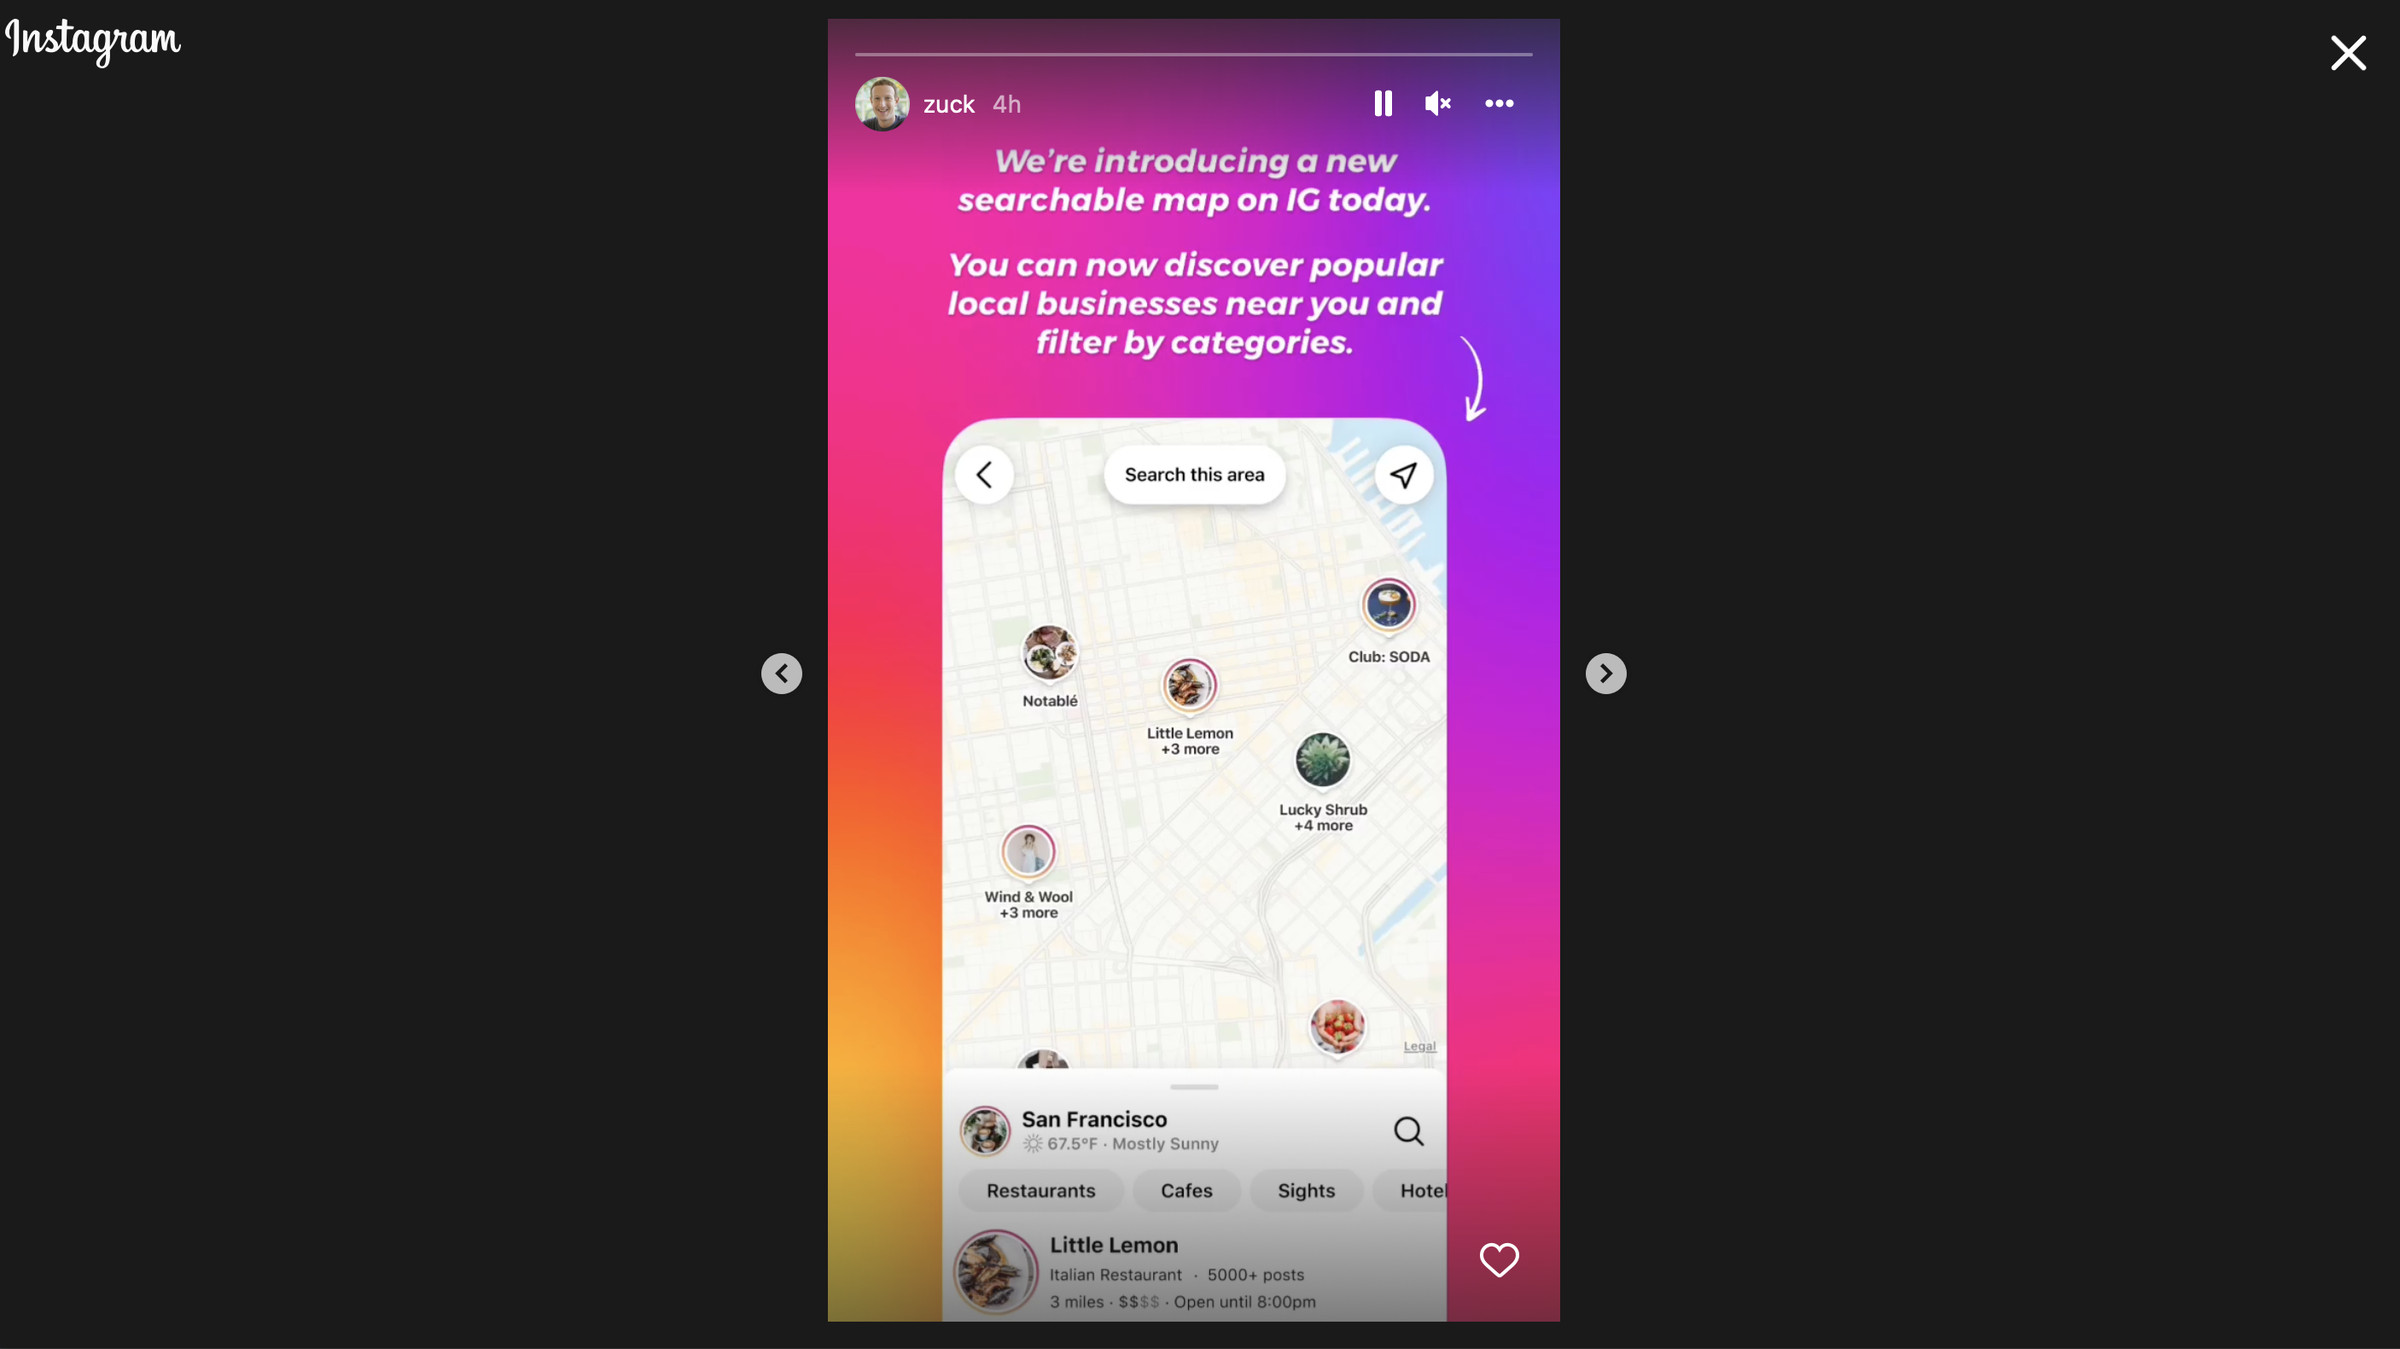 Screenshot of an Instagram story from Mark Zuckerberg with a screenshot of the map experience and text reading: “we’re introducing a new searchable map on IG today. You can now discover popular local businesses near you and filter by categories.”